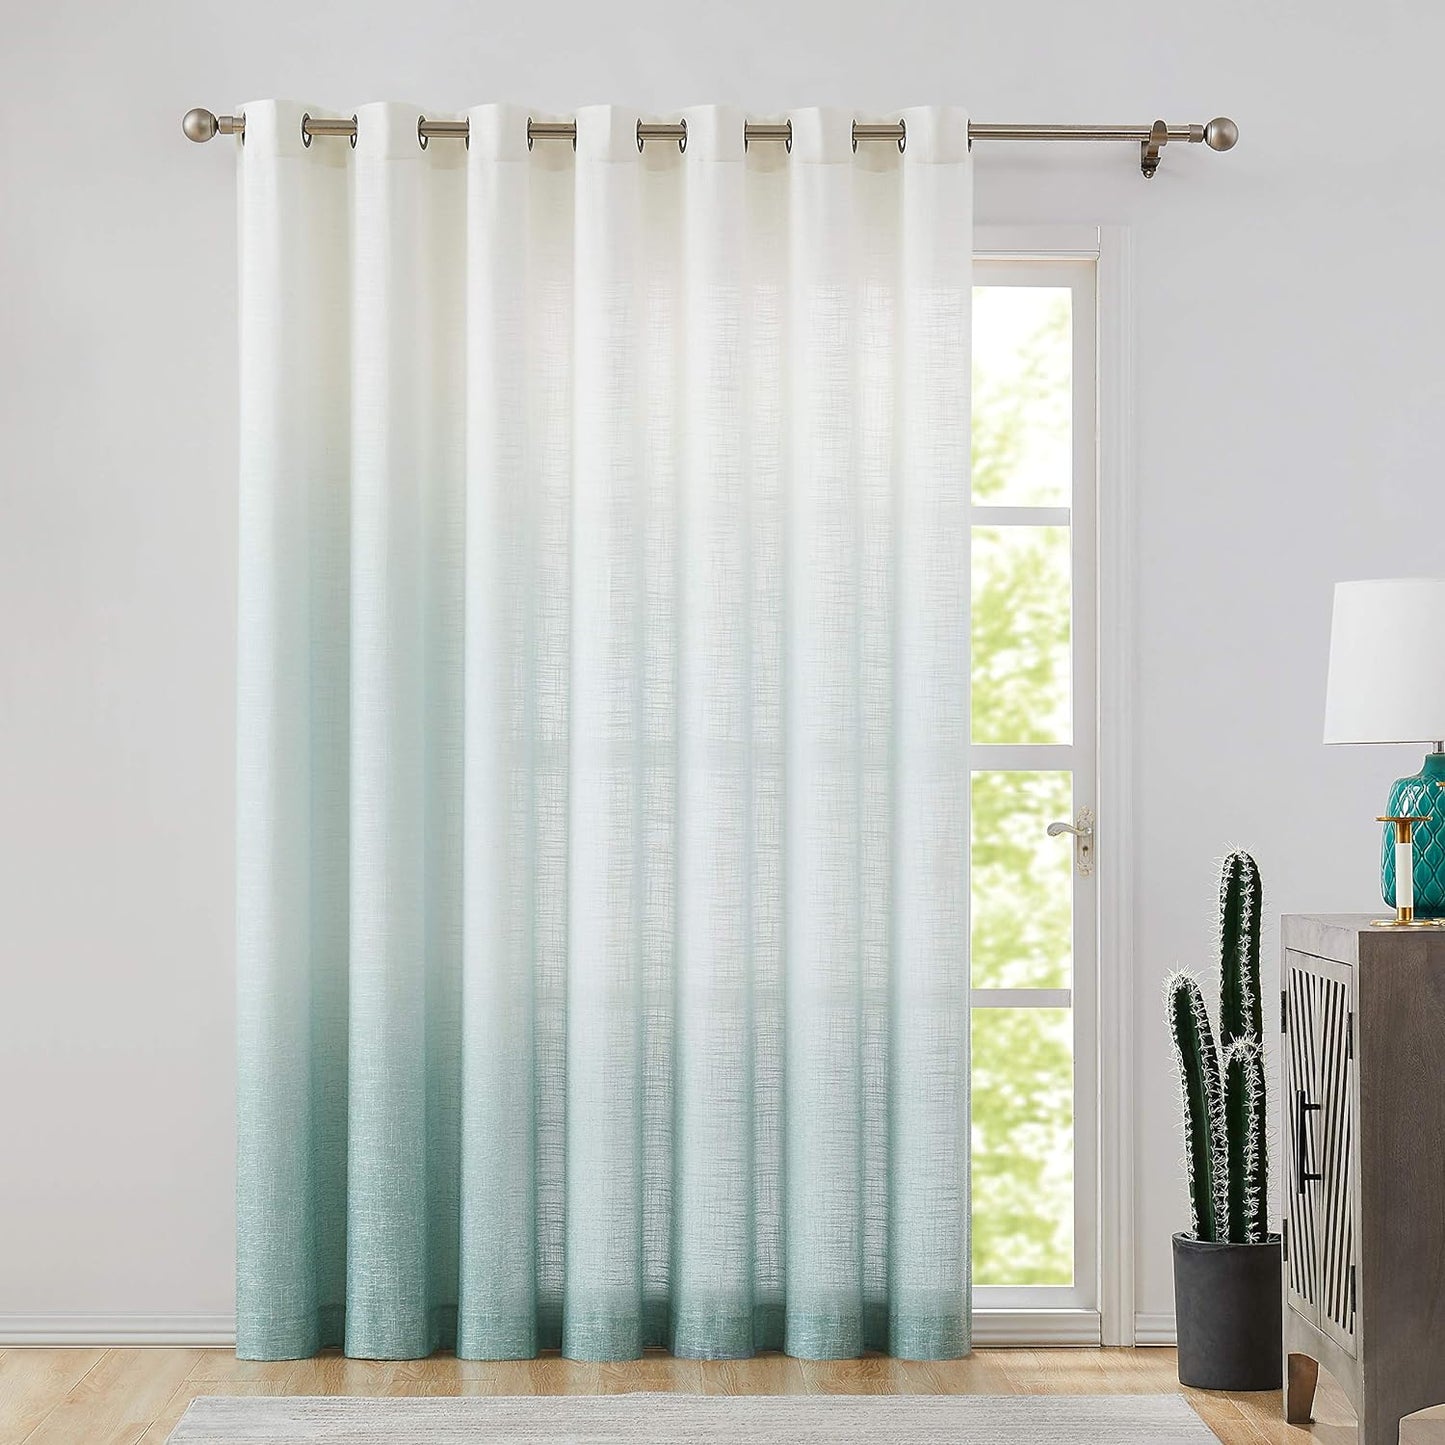 Ombre Window Door Curtain 100" Extra Wide Linen Ombre Gradient Print on Rayon Blend Fabric Treatment for Sliding Patio Door with 14 Grommets, Cream White to Light Gray, 100" X 84", 1 Panel  Central Park Aqua Blue 100" X 95" (1 Panel) 